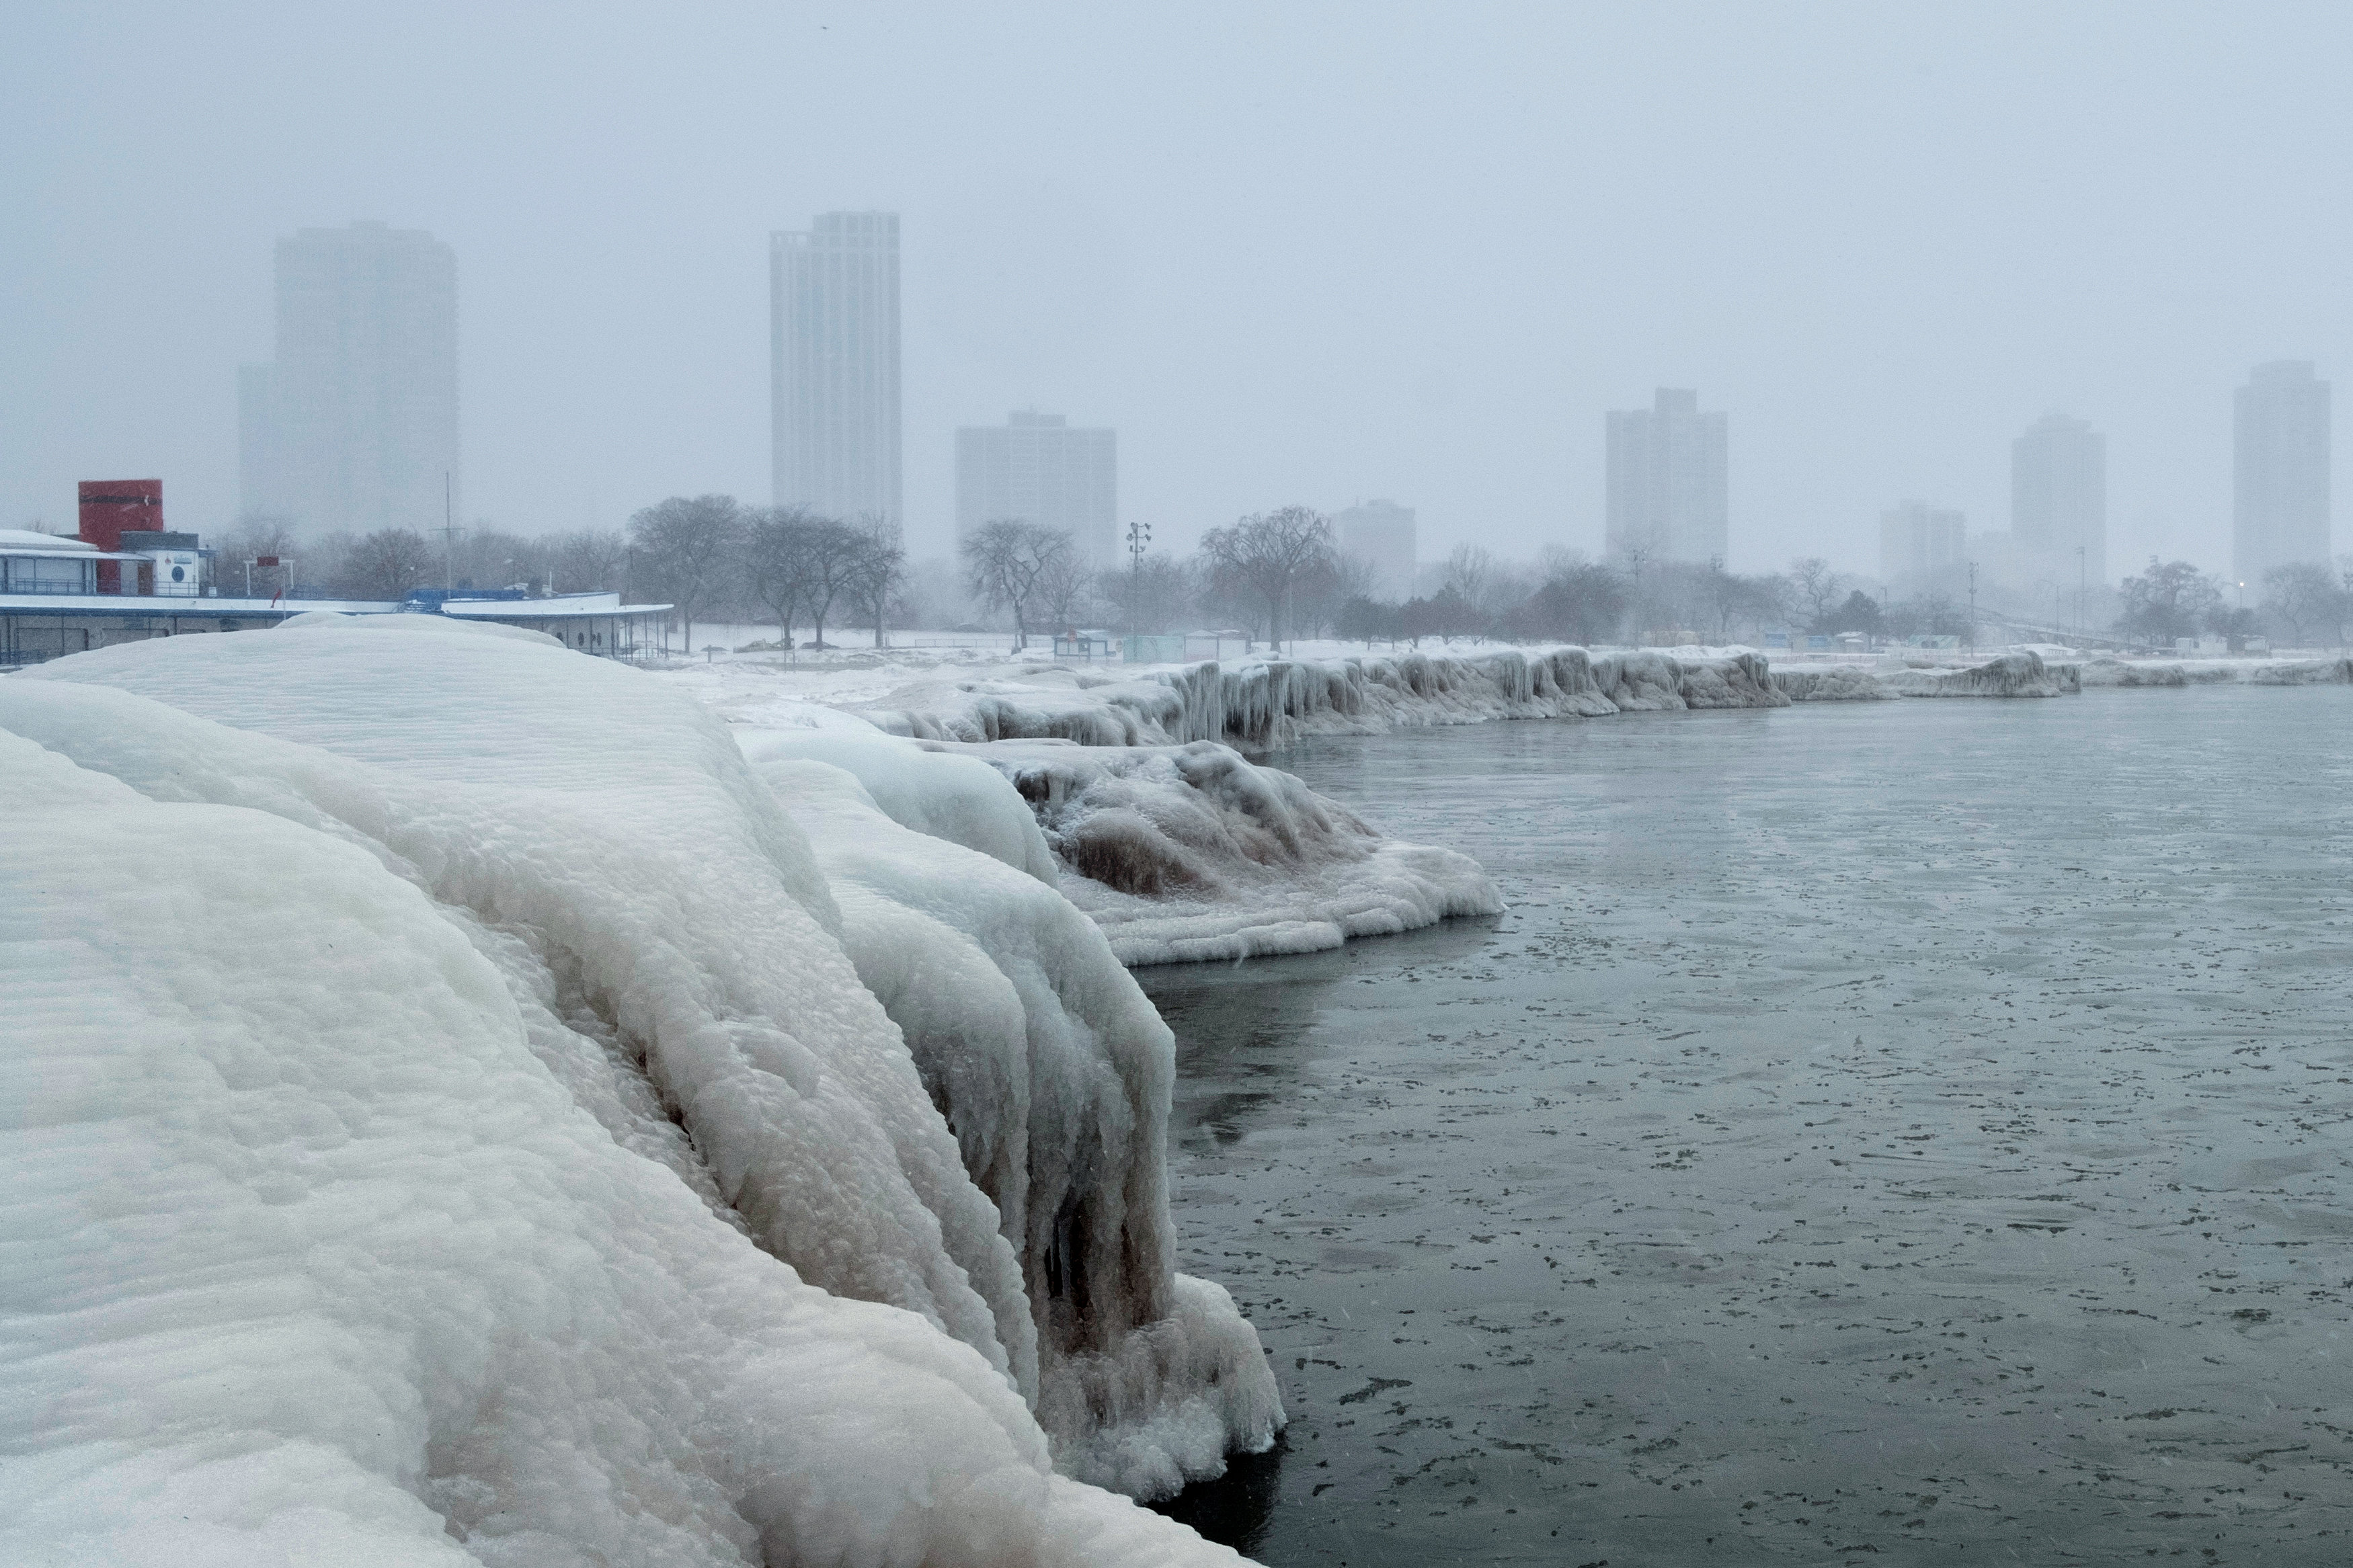 The city skyline is seen from the North Avenue Beach at Lake Michigan as bitter cold phenomenon called the polar vortex has descended on much of the central and eastern United States